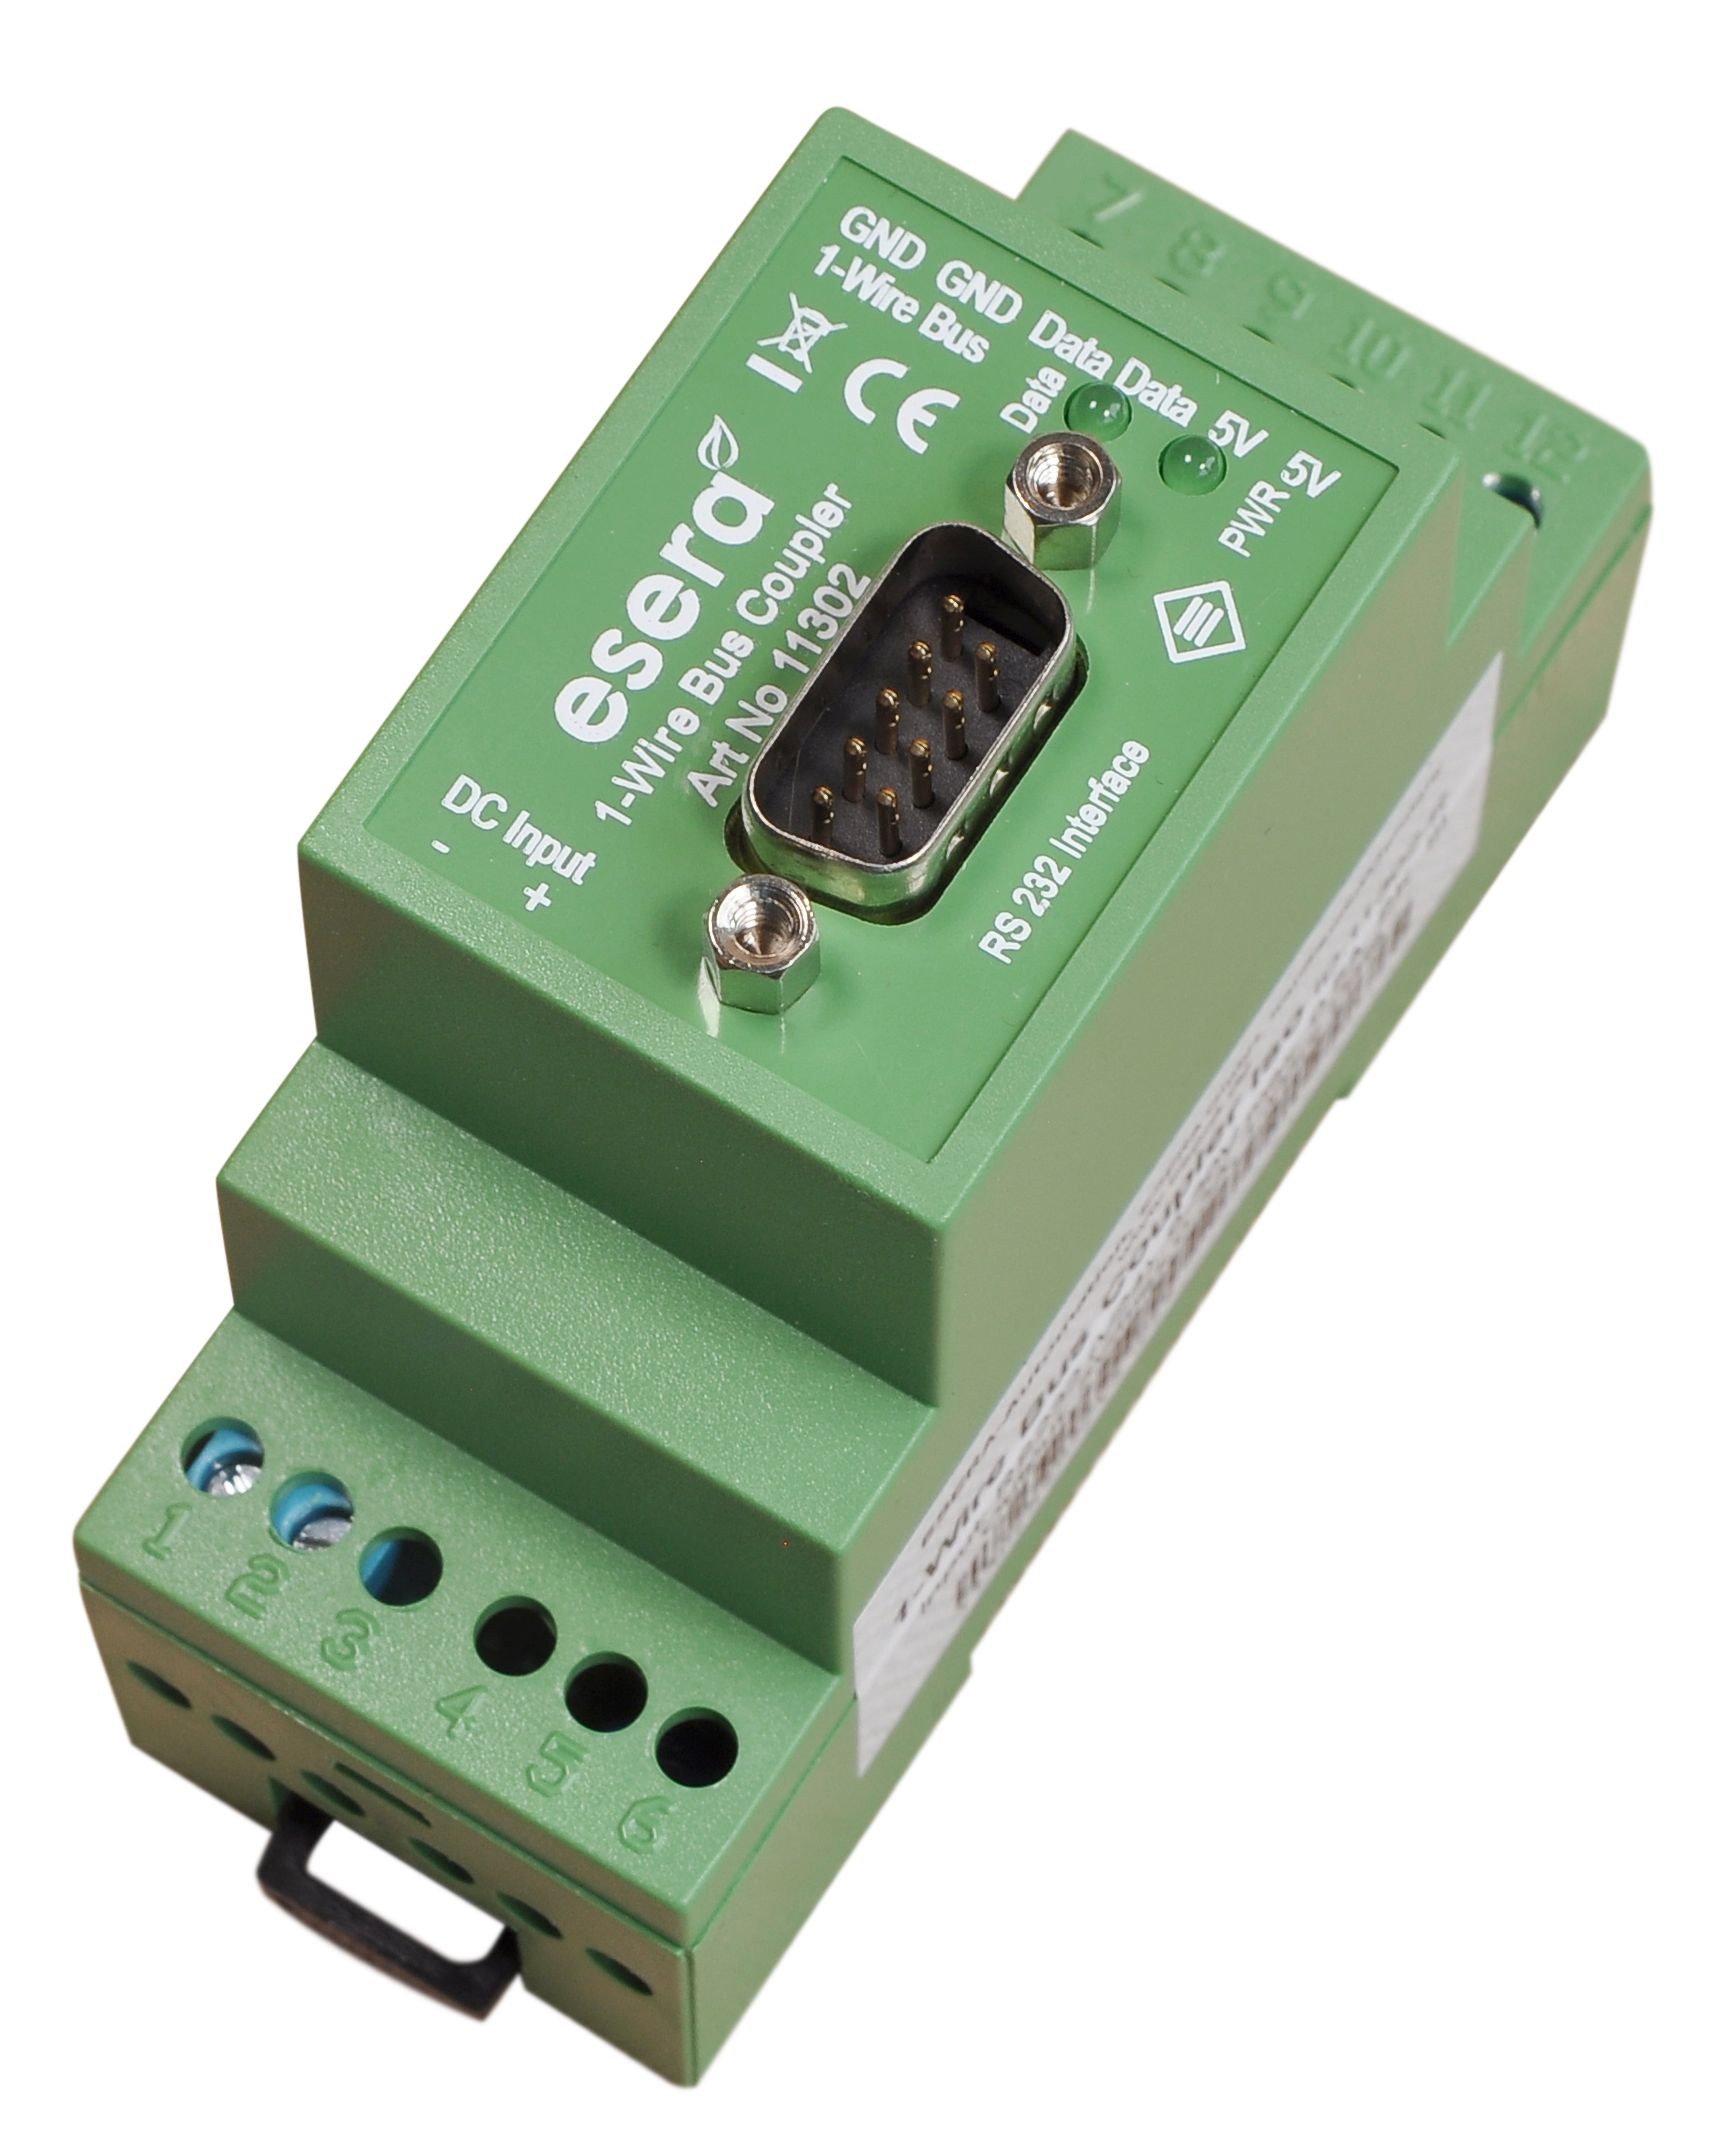 1-Wire bus coupler with RS232 (V24 interface), industrial version, galvanic isolation, DS2480